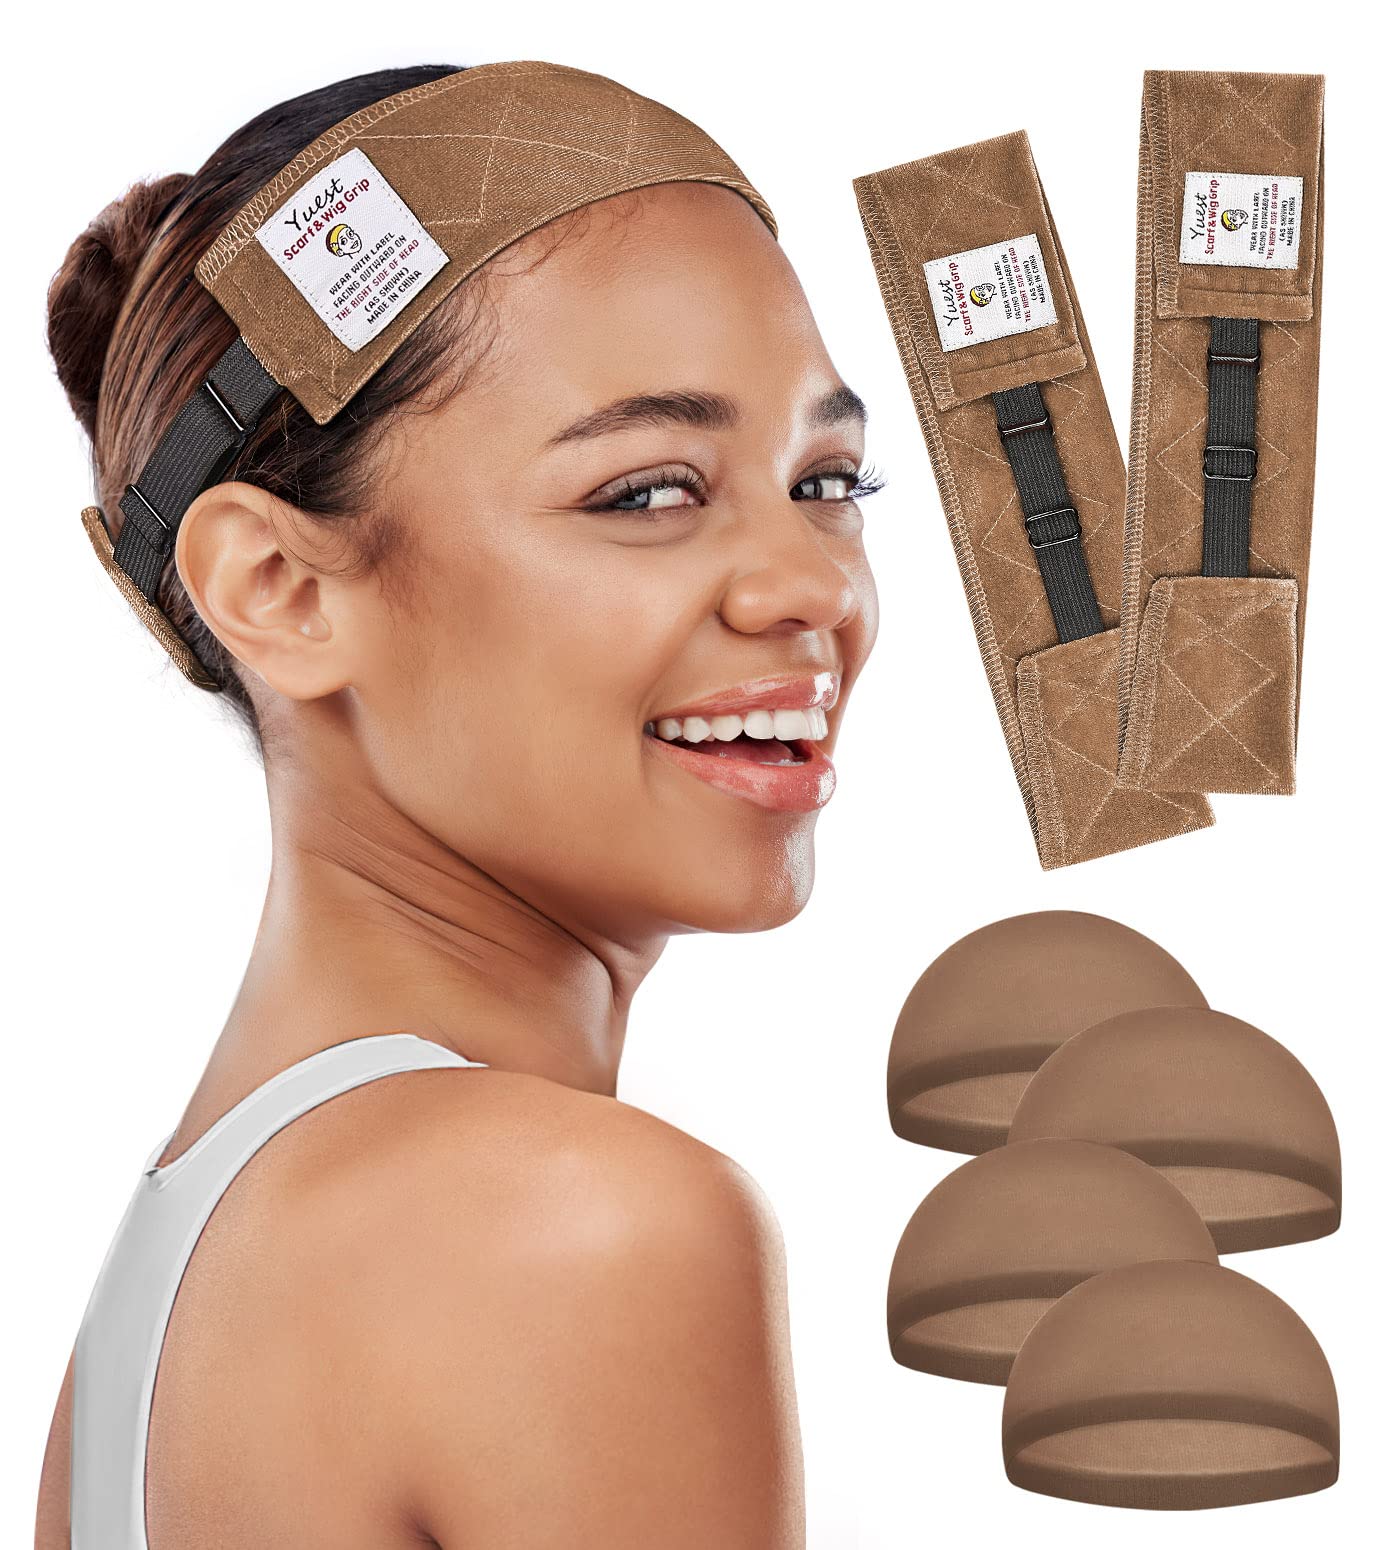 Yuest Wig Grip Wig Bands for Keeping Wigs in Place Velvet Wig Grips  Headband No Slip Wig Gripper 2 Pcs Brown-2 pcs Wig Grip+4 pcs Wig Cap